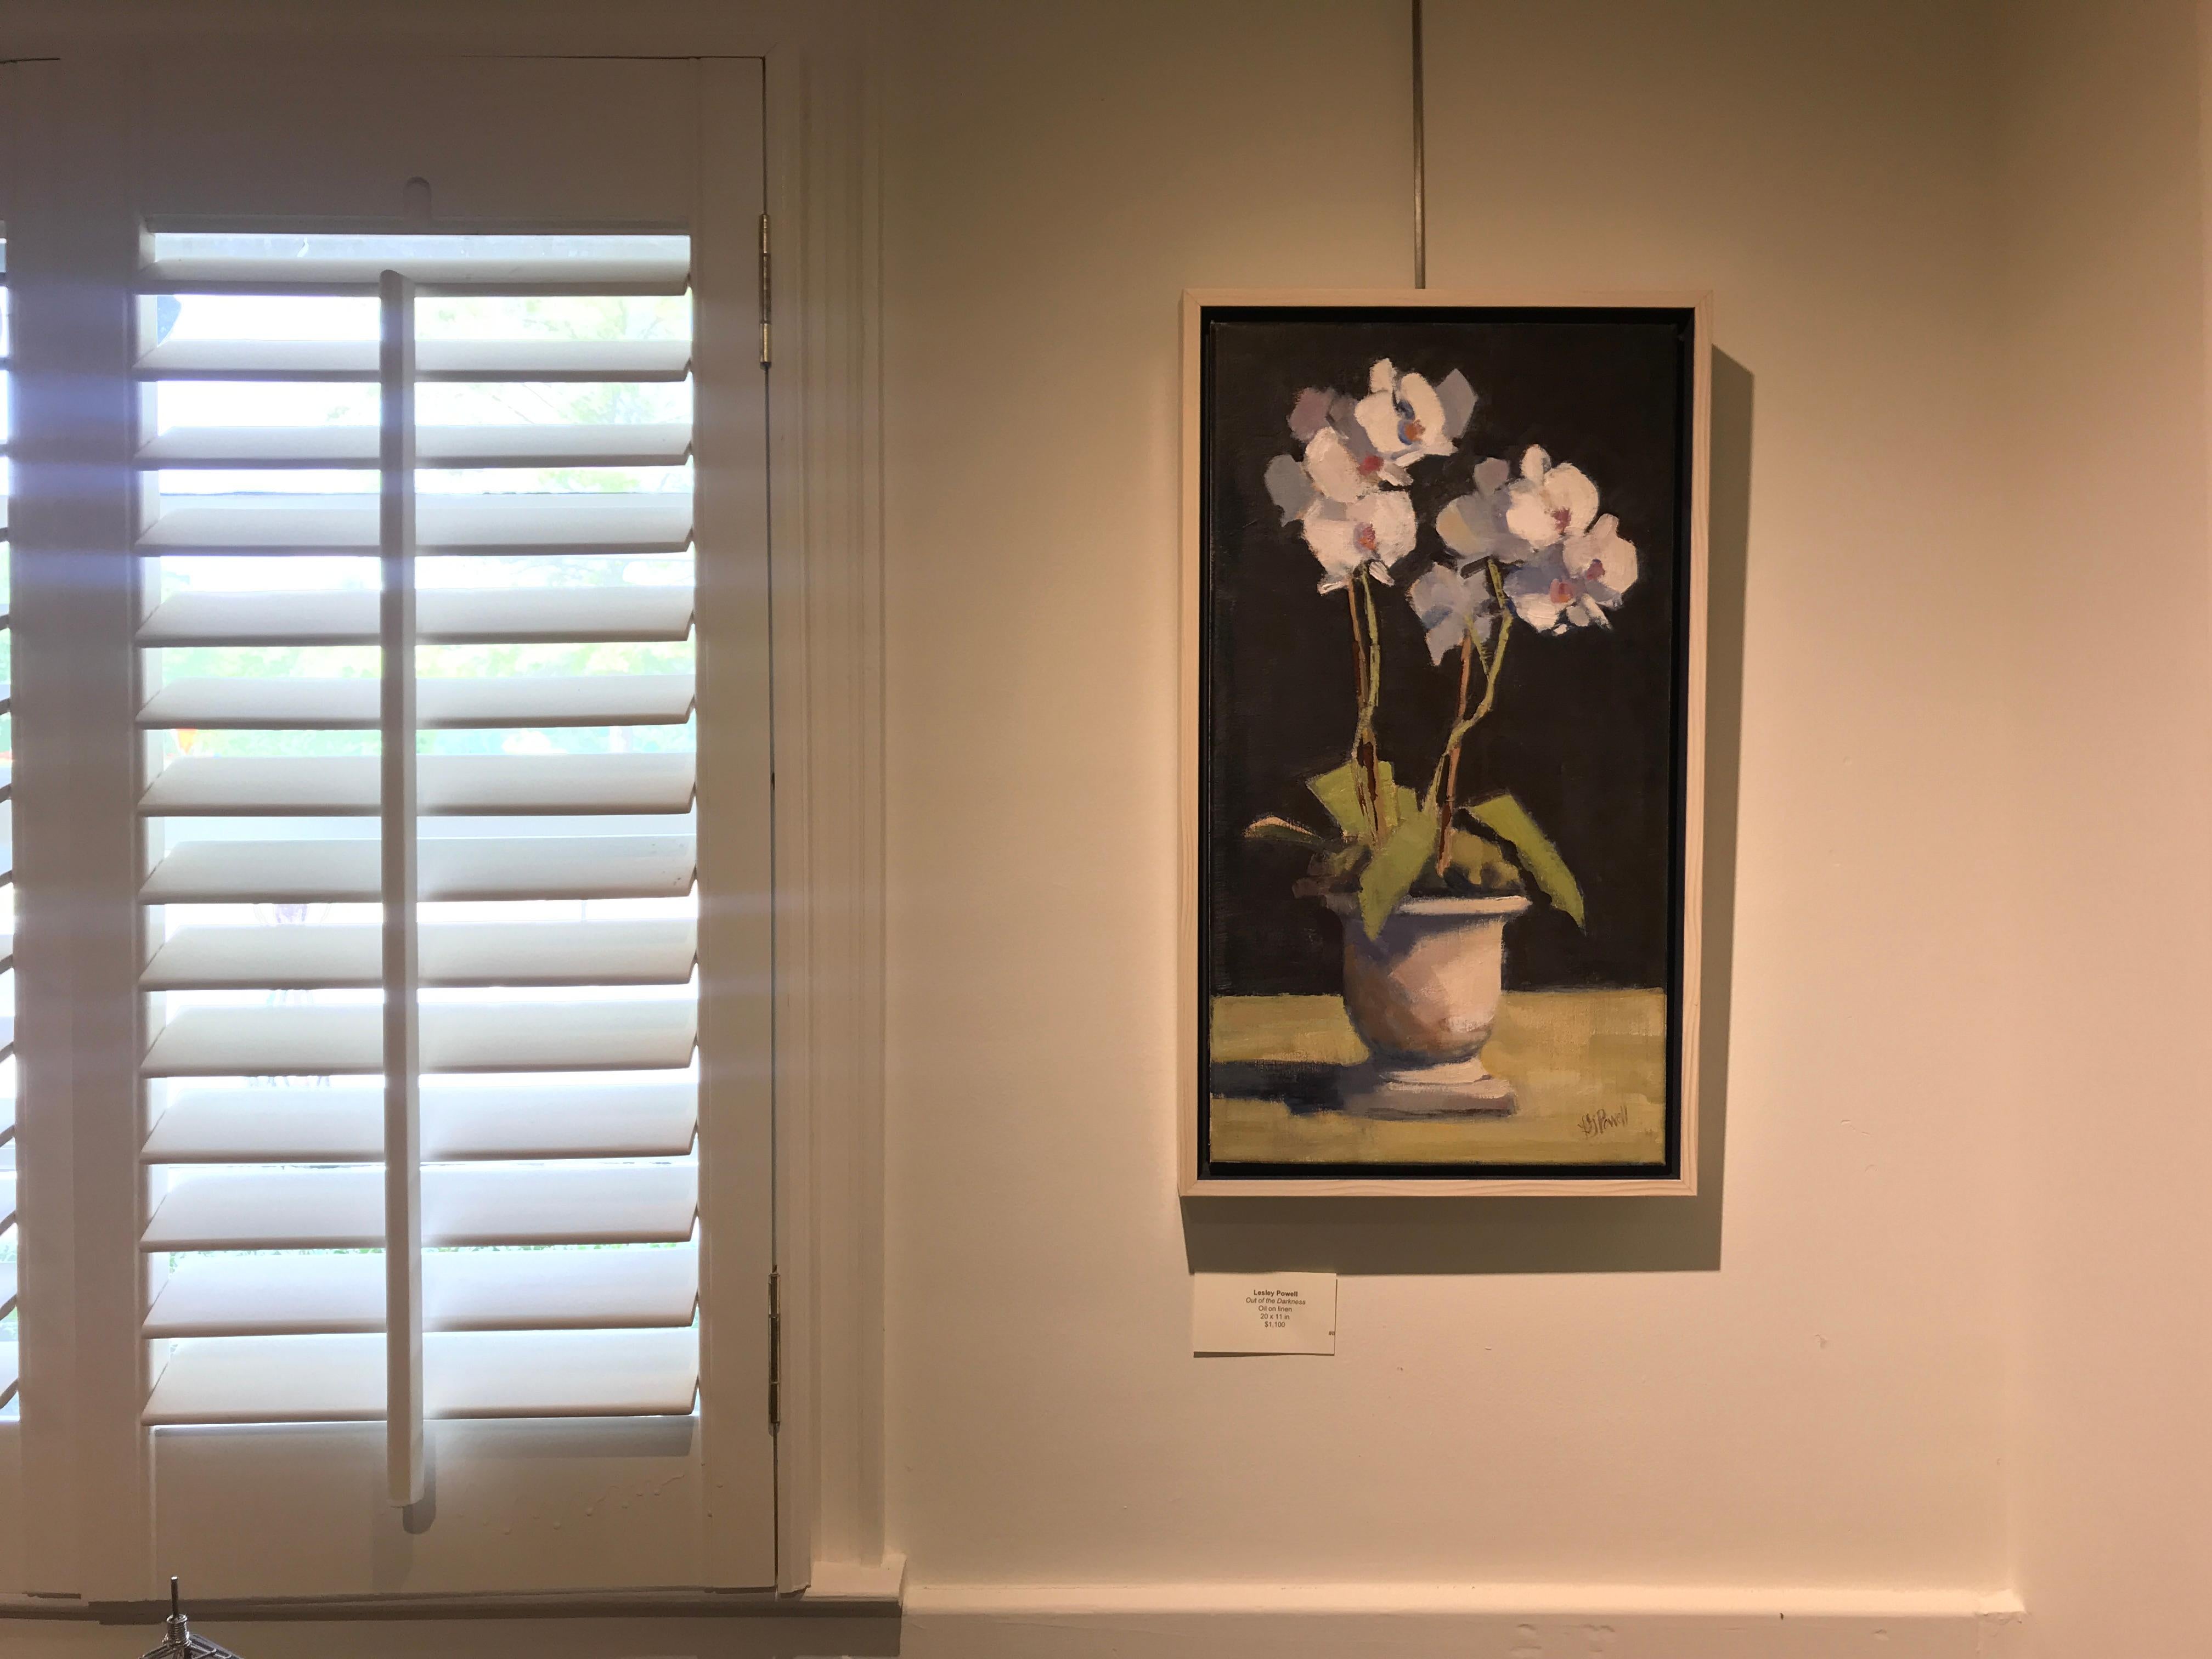 'Out of the Darkness' is a vertical Post-Impressionist floral oil on linen painting created by American artist Lesley Powell in 2018. Featuring a palette made of contrasting colors such as black, white, green and brown accented with discreet pink